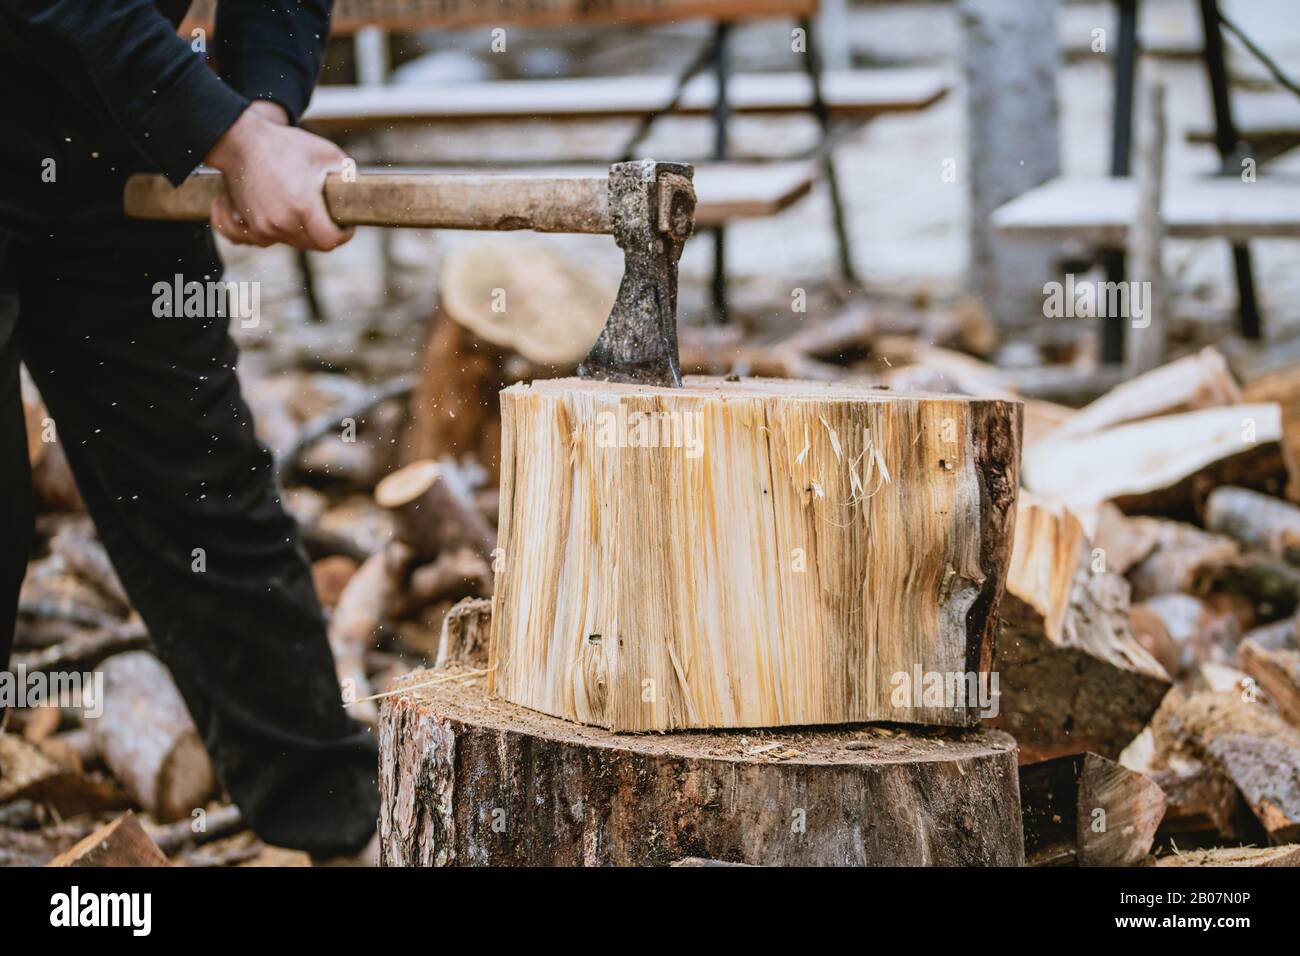 Man is chopping wood with vintage axe. Detail of flying pieces of wood on log with sawdust. Stock Photo